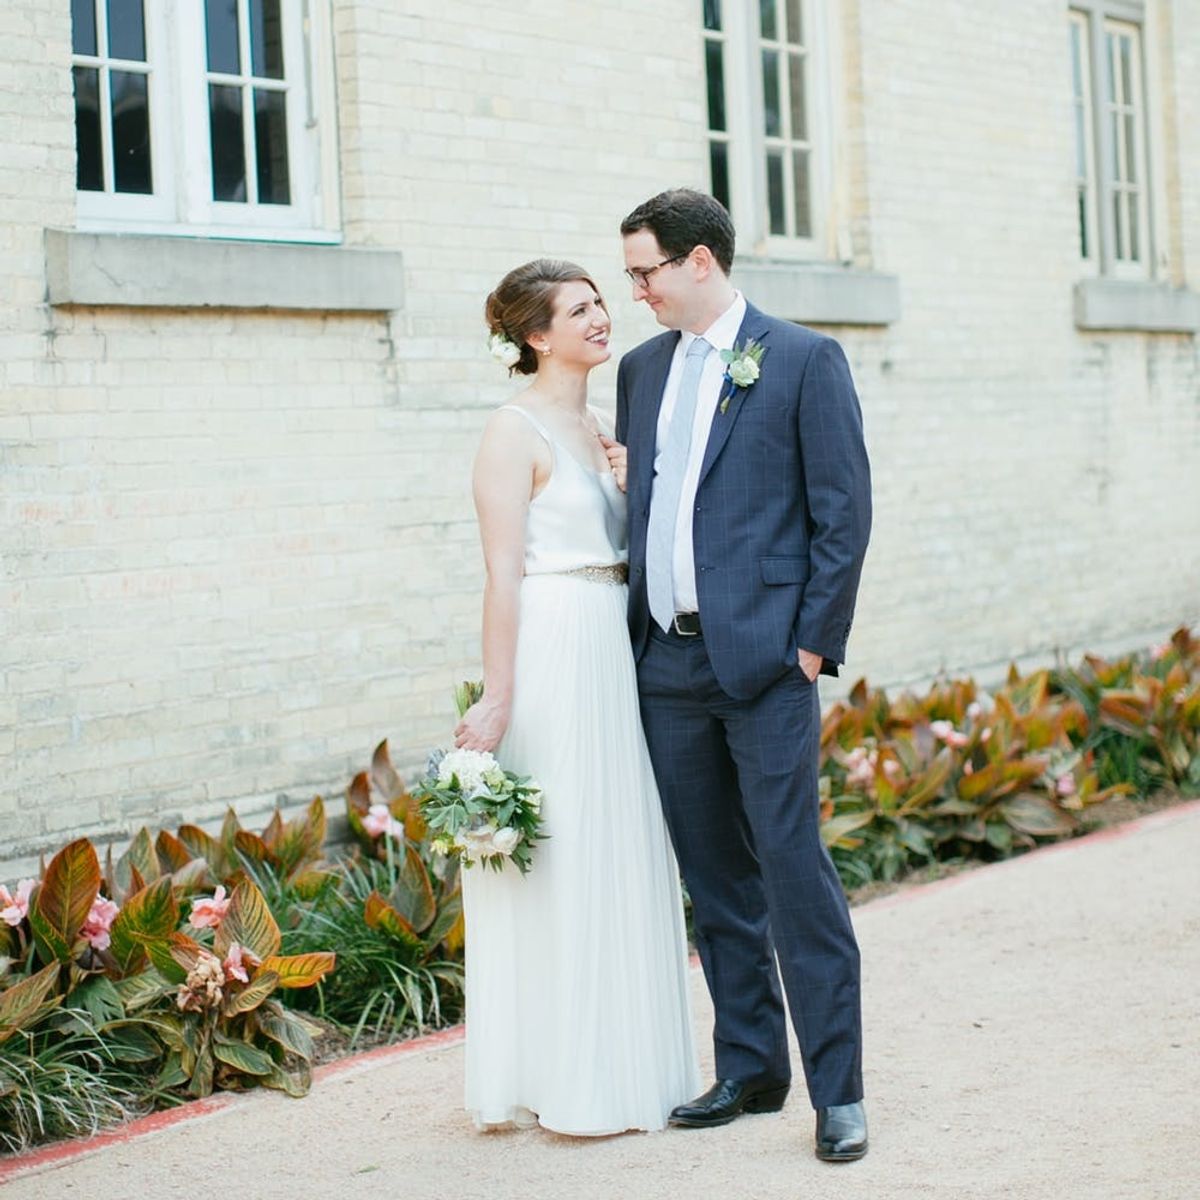 This Urban Museum Wedding Is Every Modern Girl’s Dream